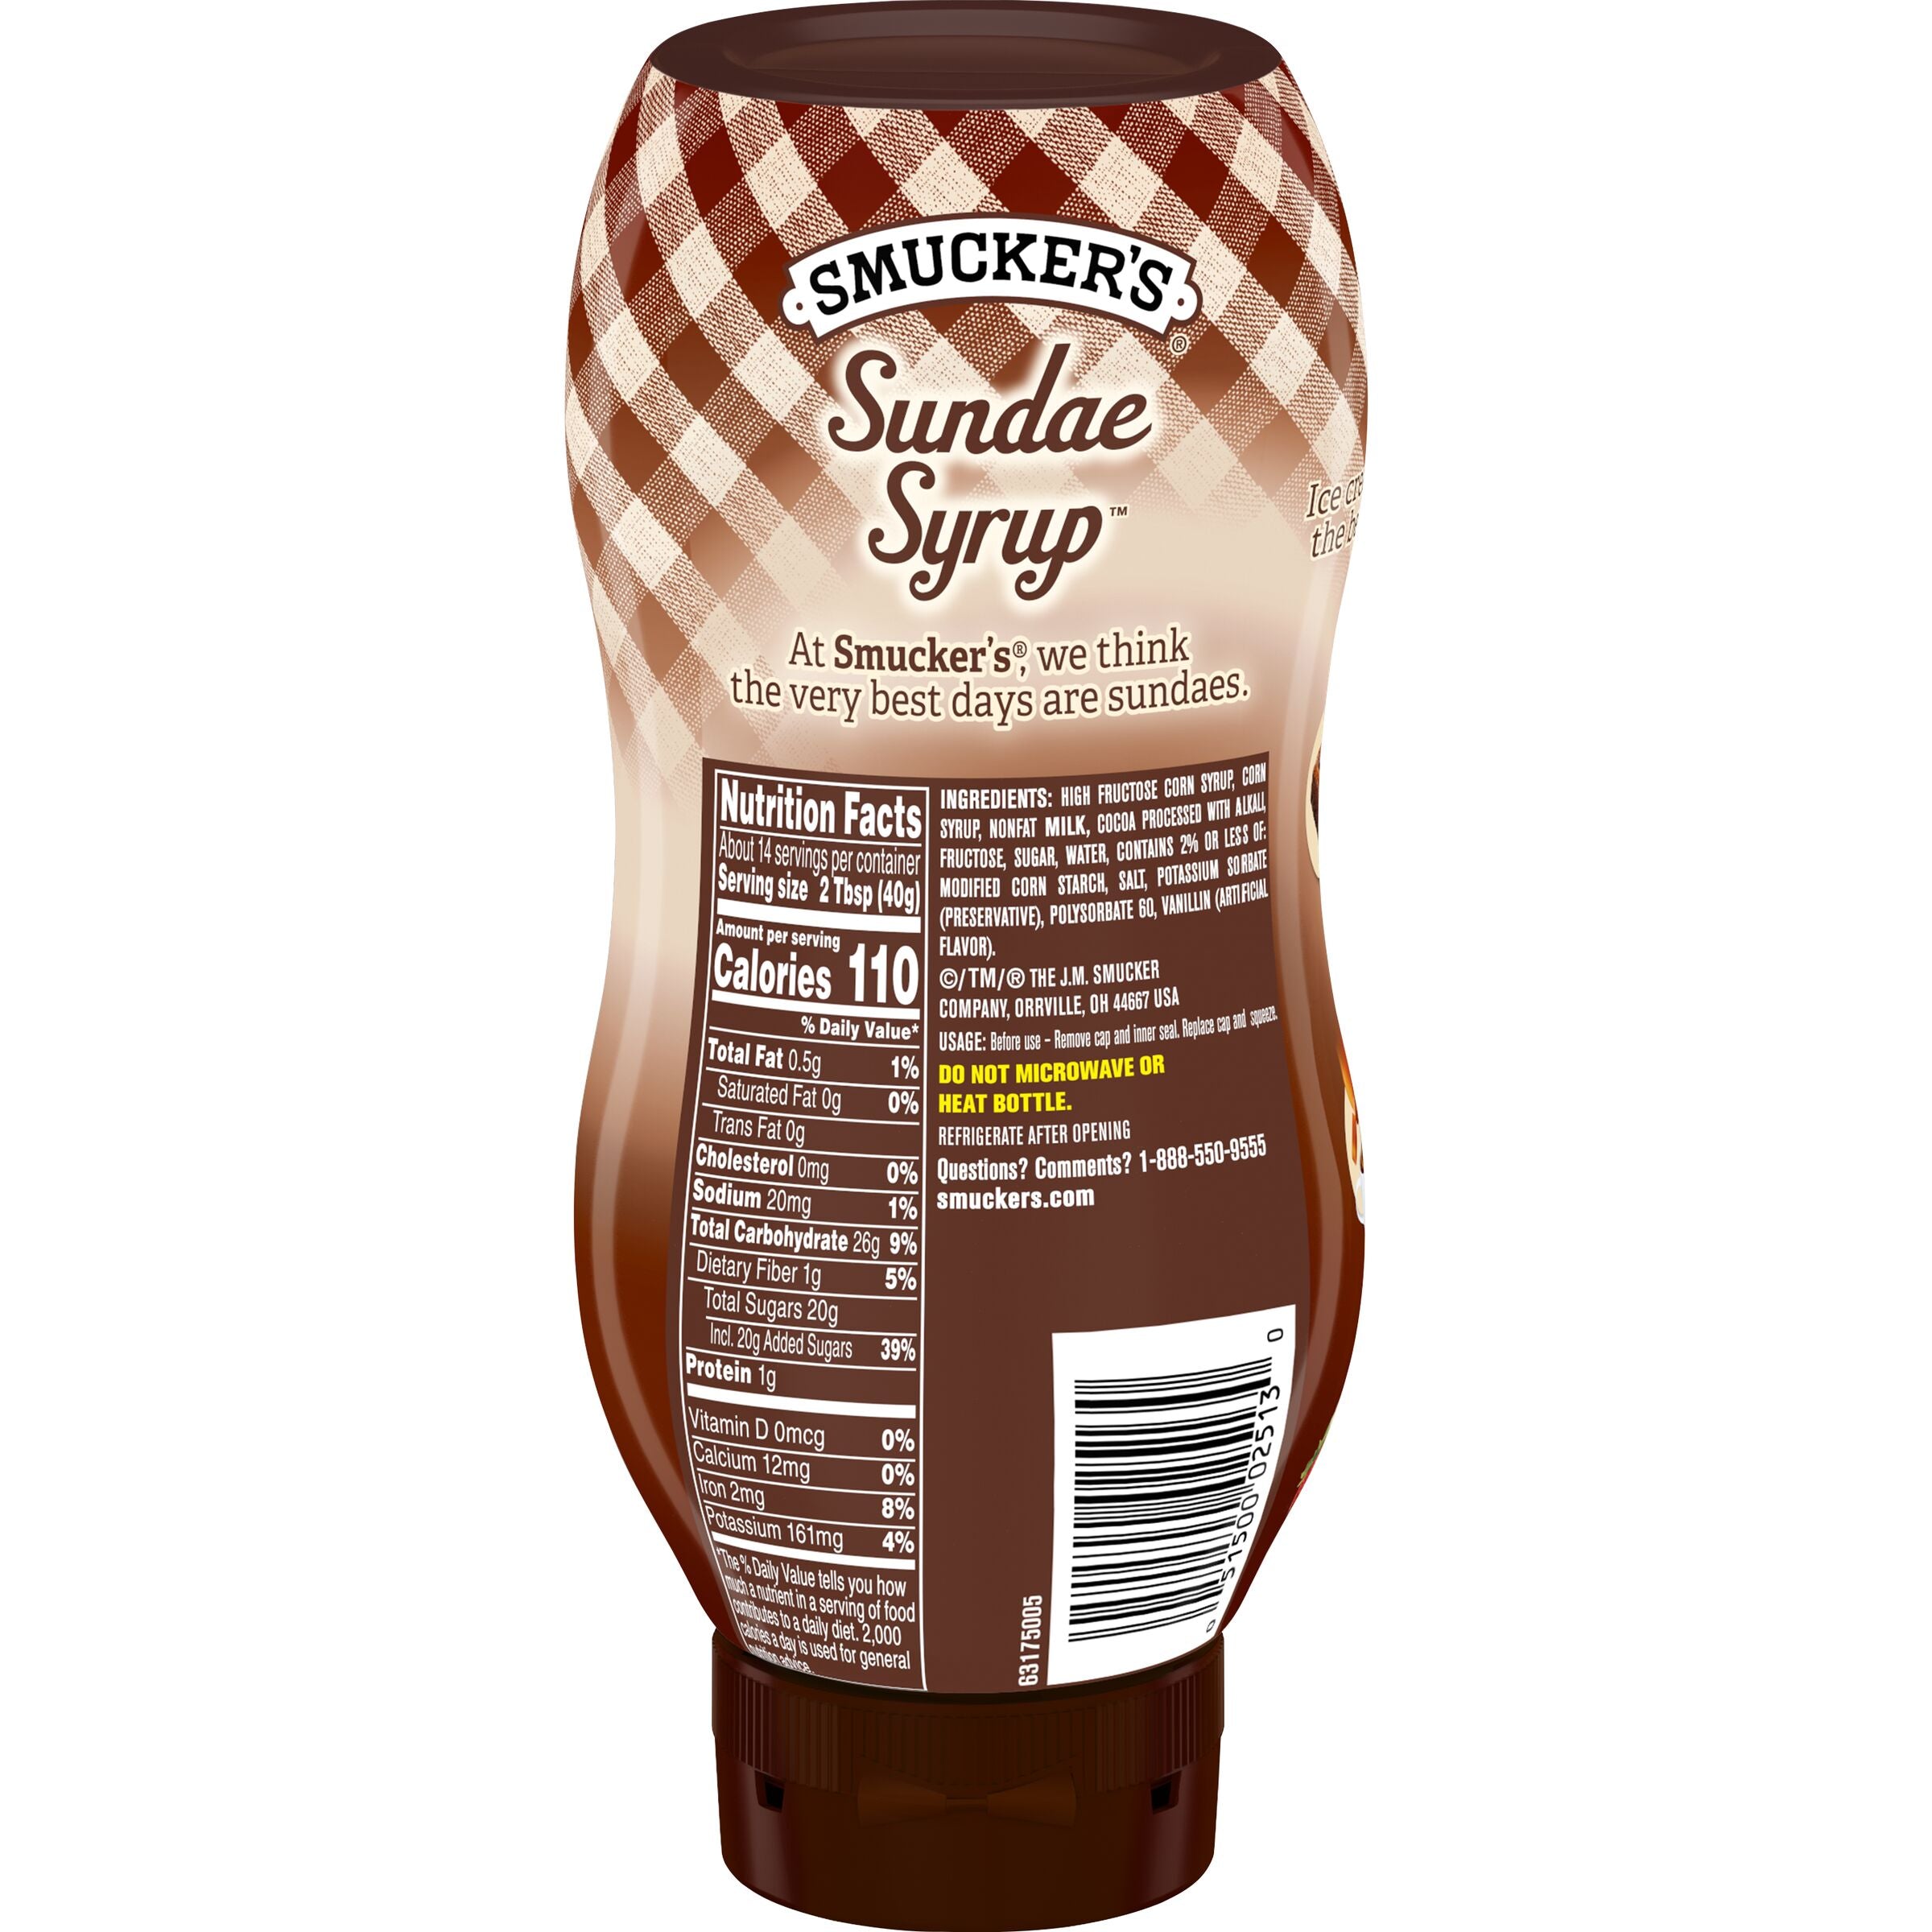 Smucker's Sundae Syrup Chocolate Flavored Syrup, 20 oz